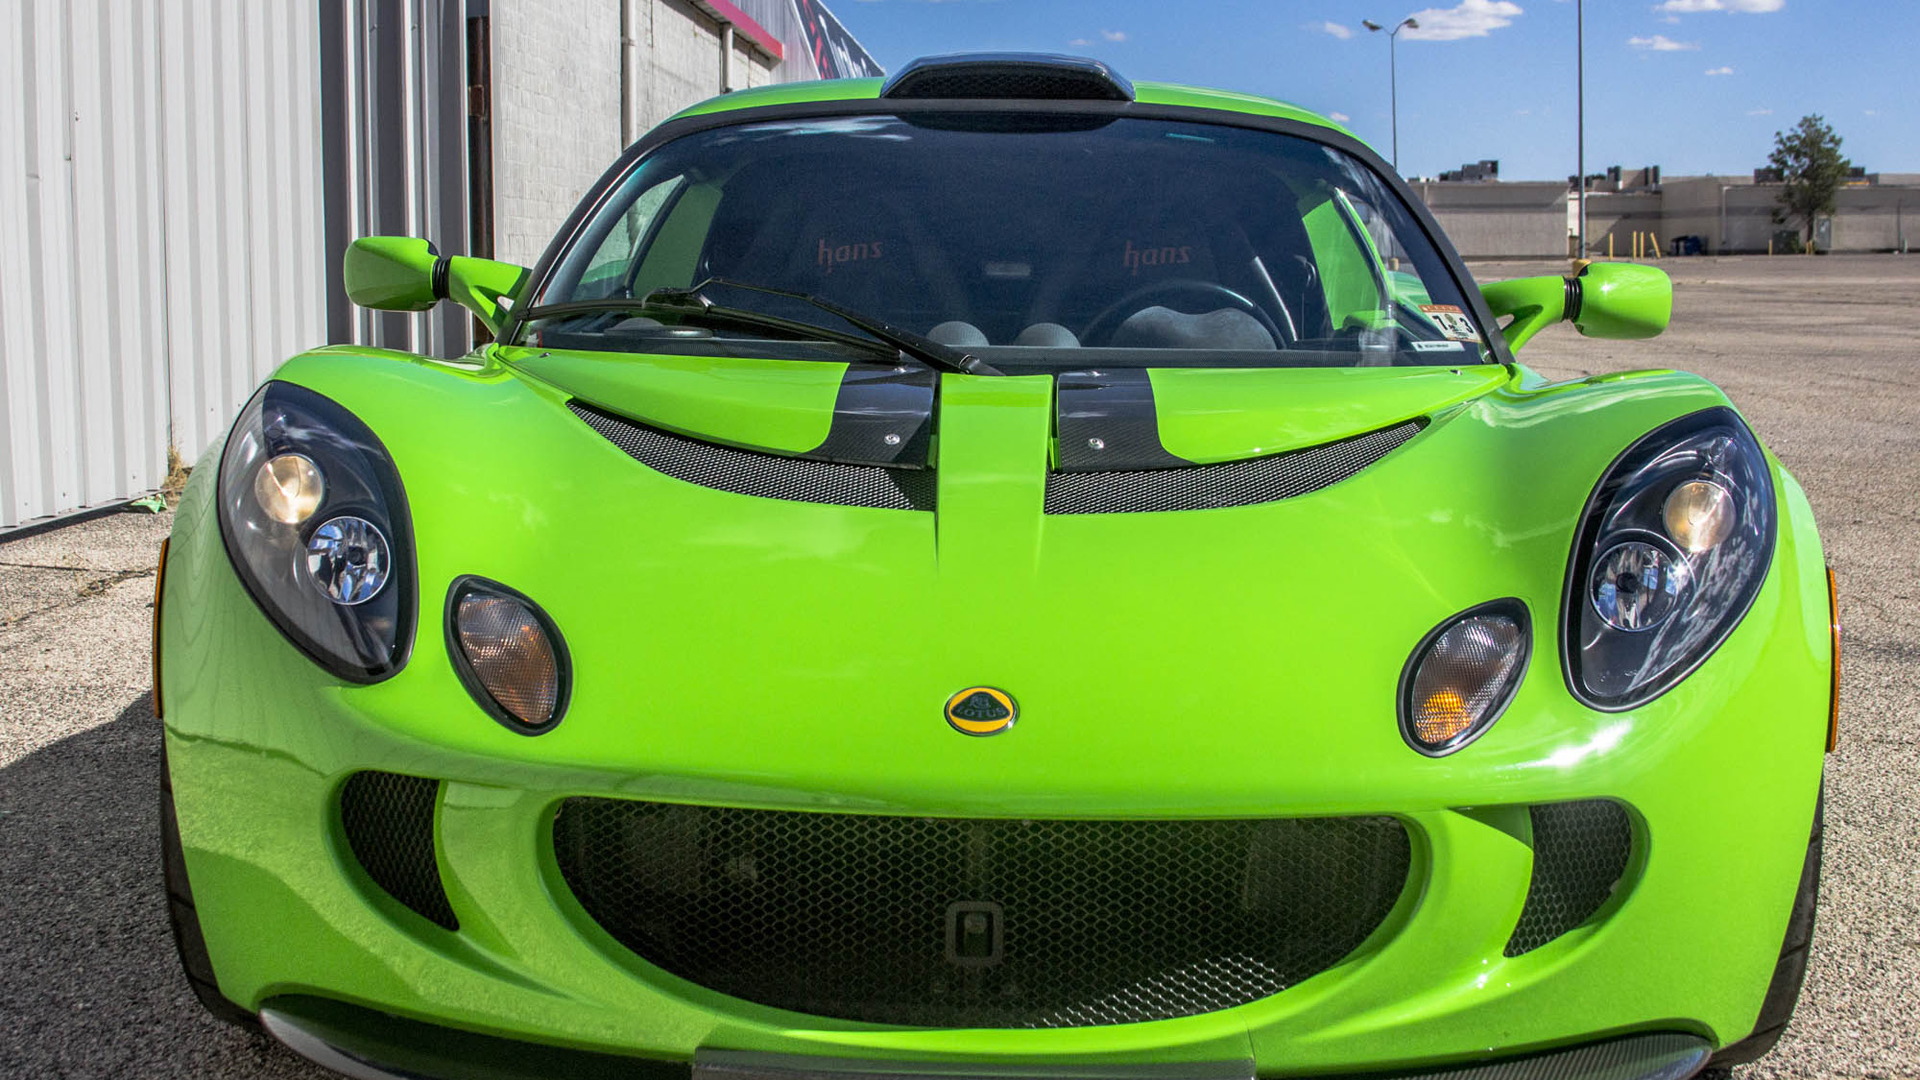 2009 Lotus Exige S 260 once owned by Jerry Seinfeld - Image via Dan Kruse Classics